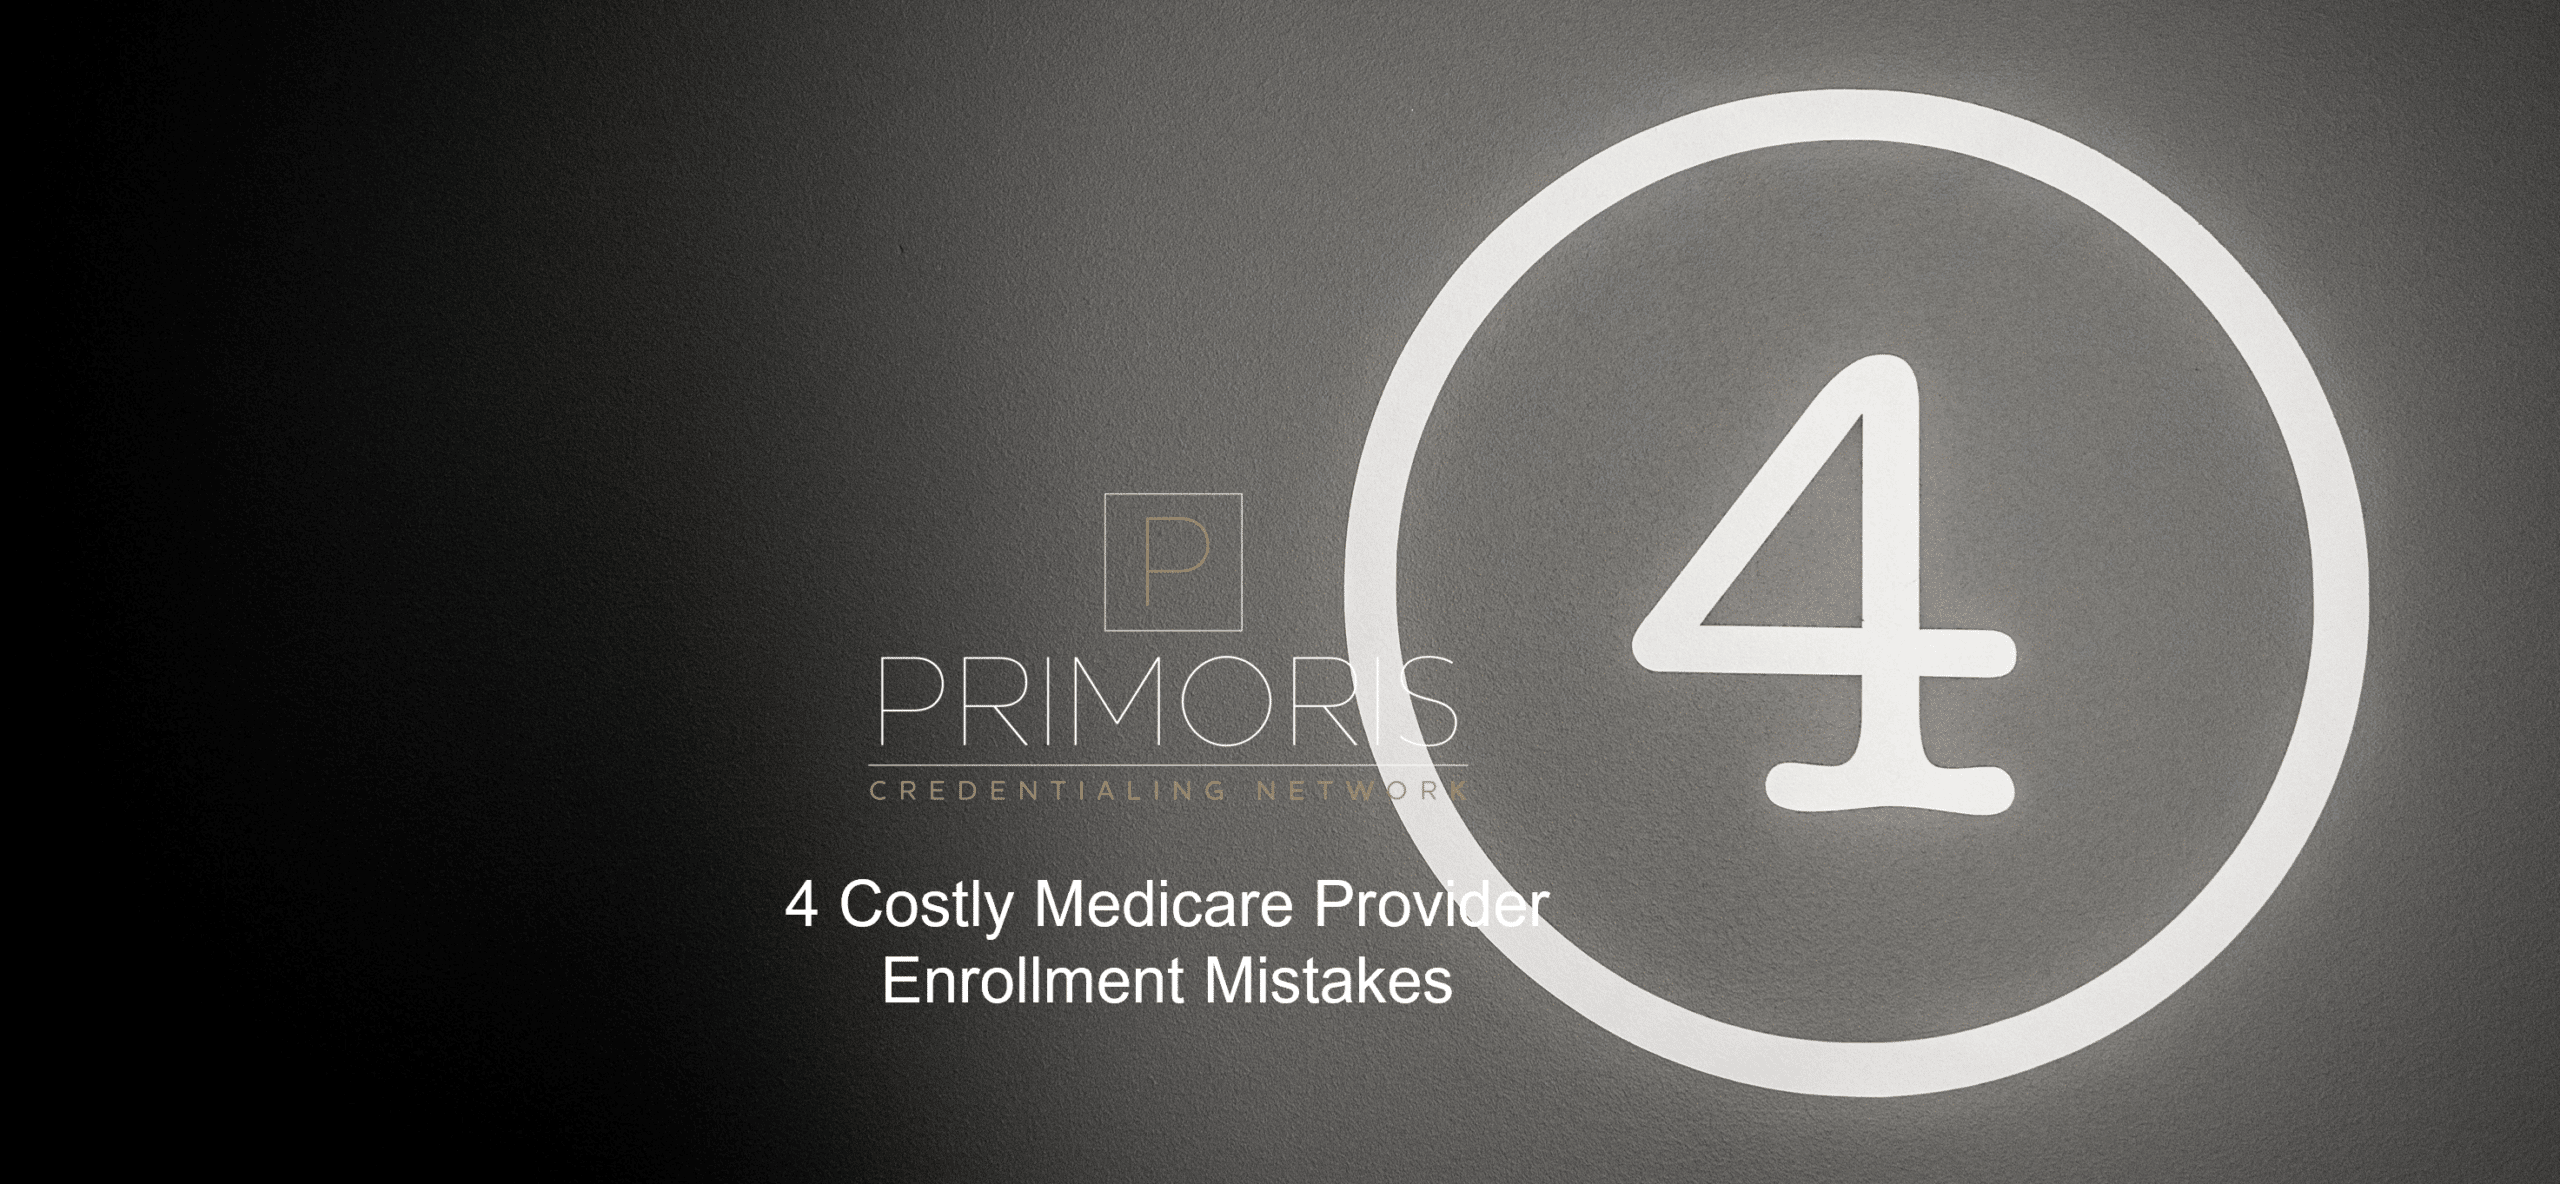 4 Costly Medicare Provider Enrollment Mistakes